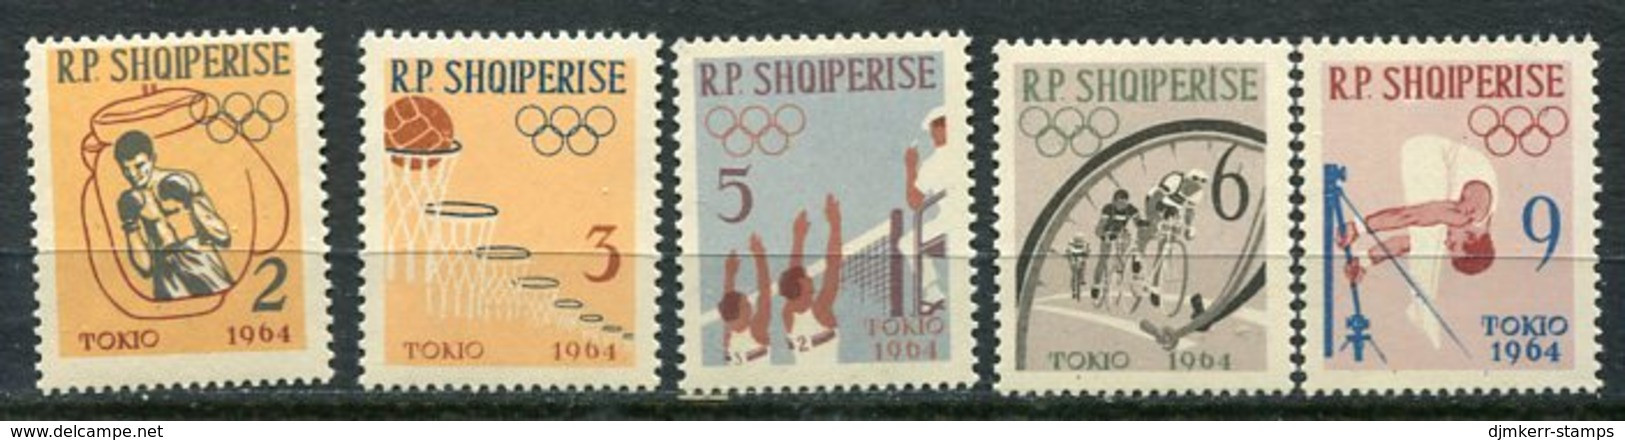 ALBANIA 1963 Olympic Games Perforated Set MNH / **  Michel 747-51A - Albanien